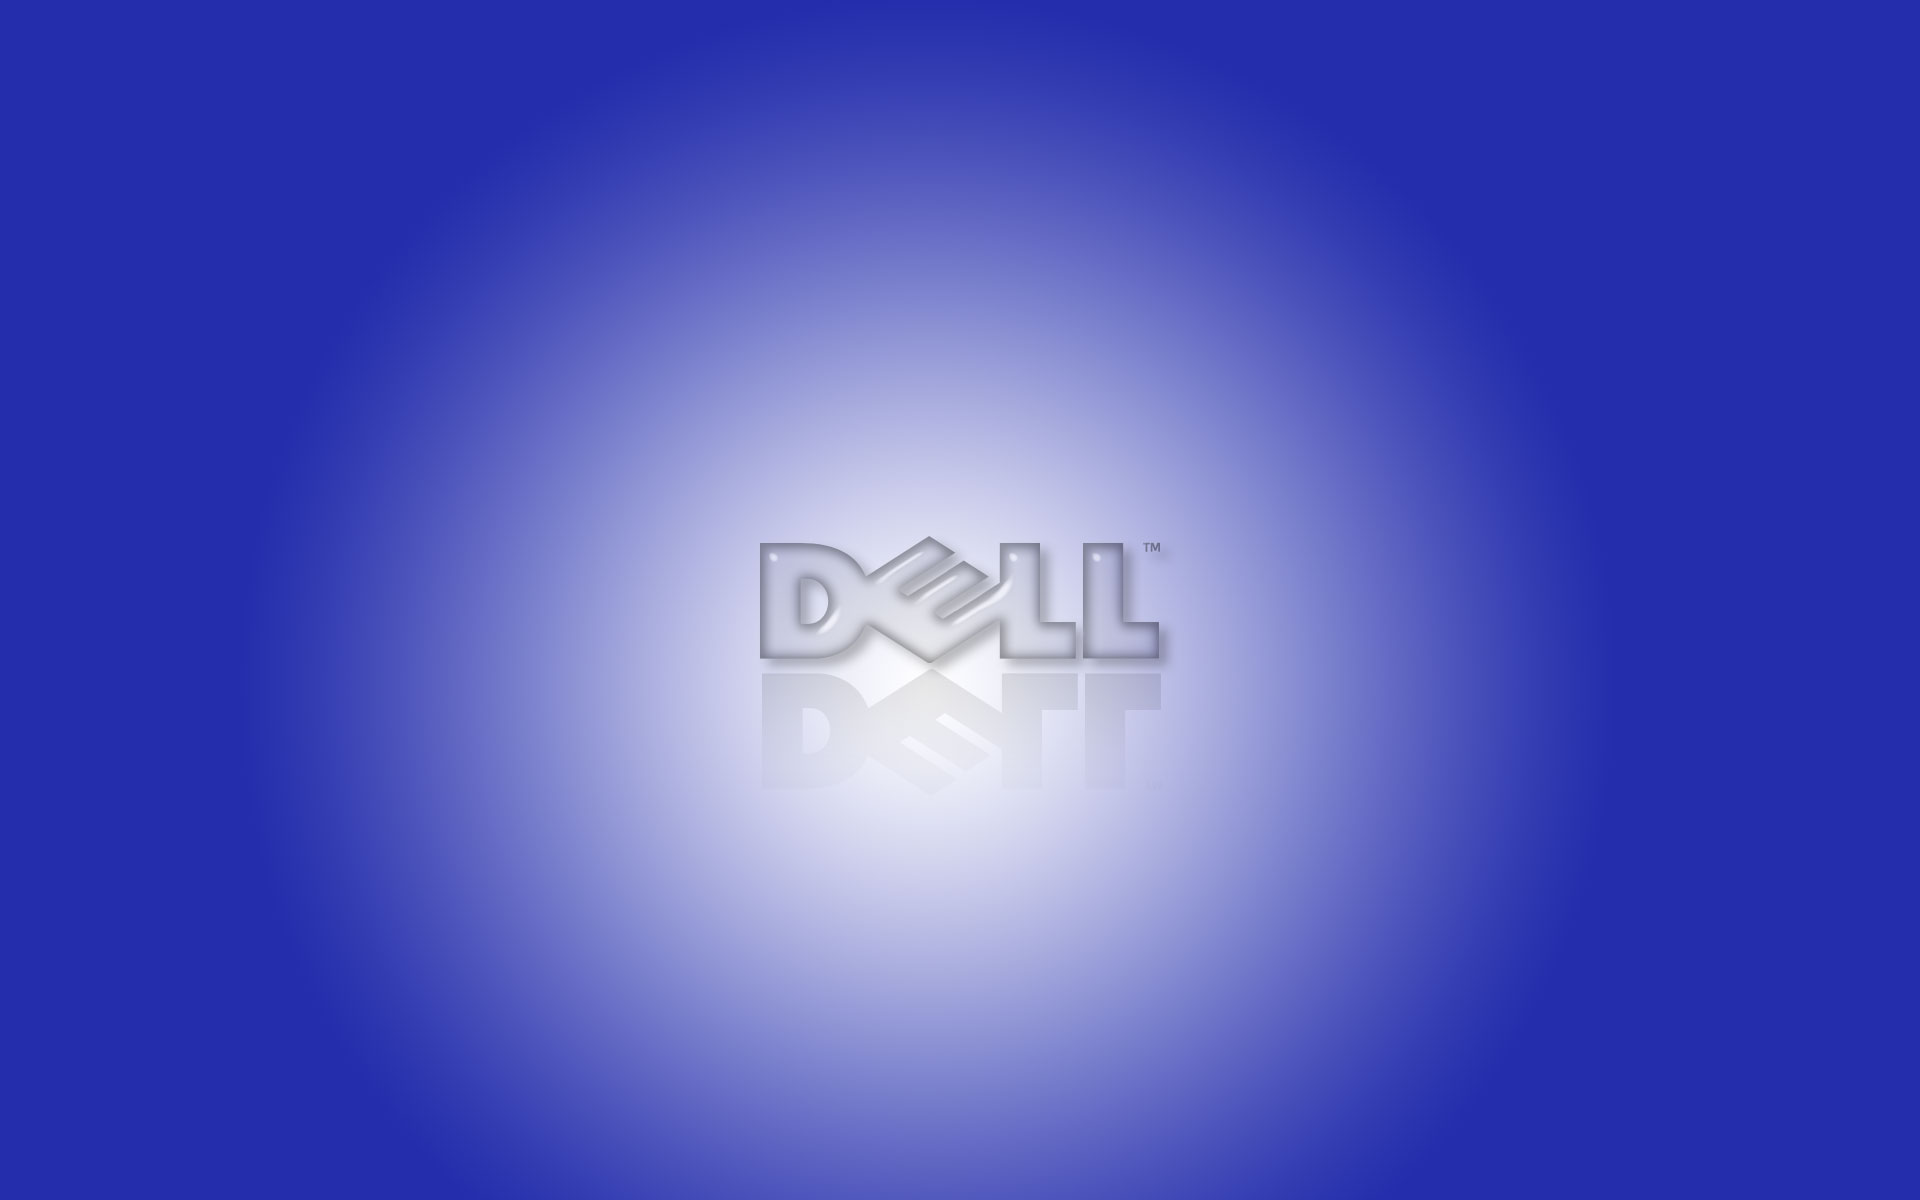 Dell Wallpaper Mkii By Hmsdexter